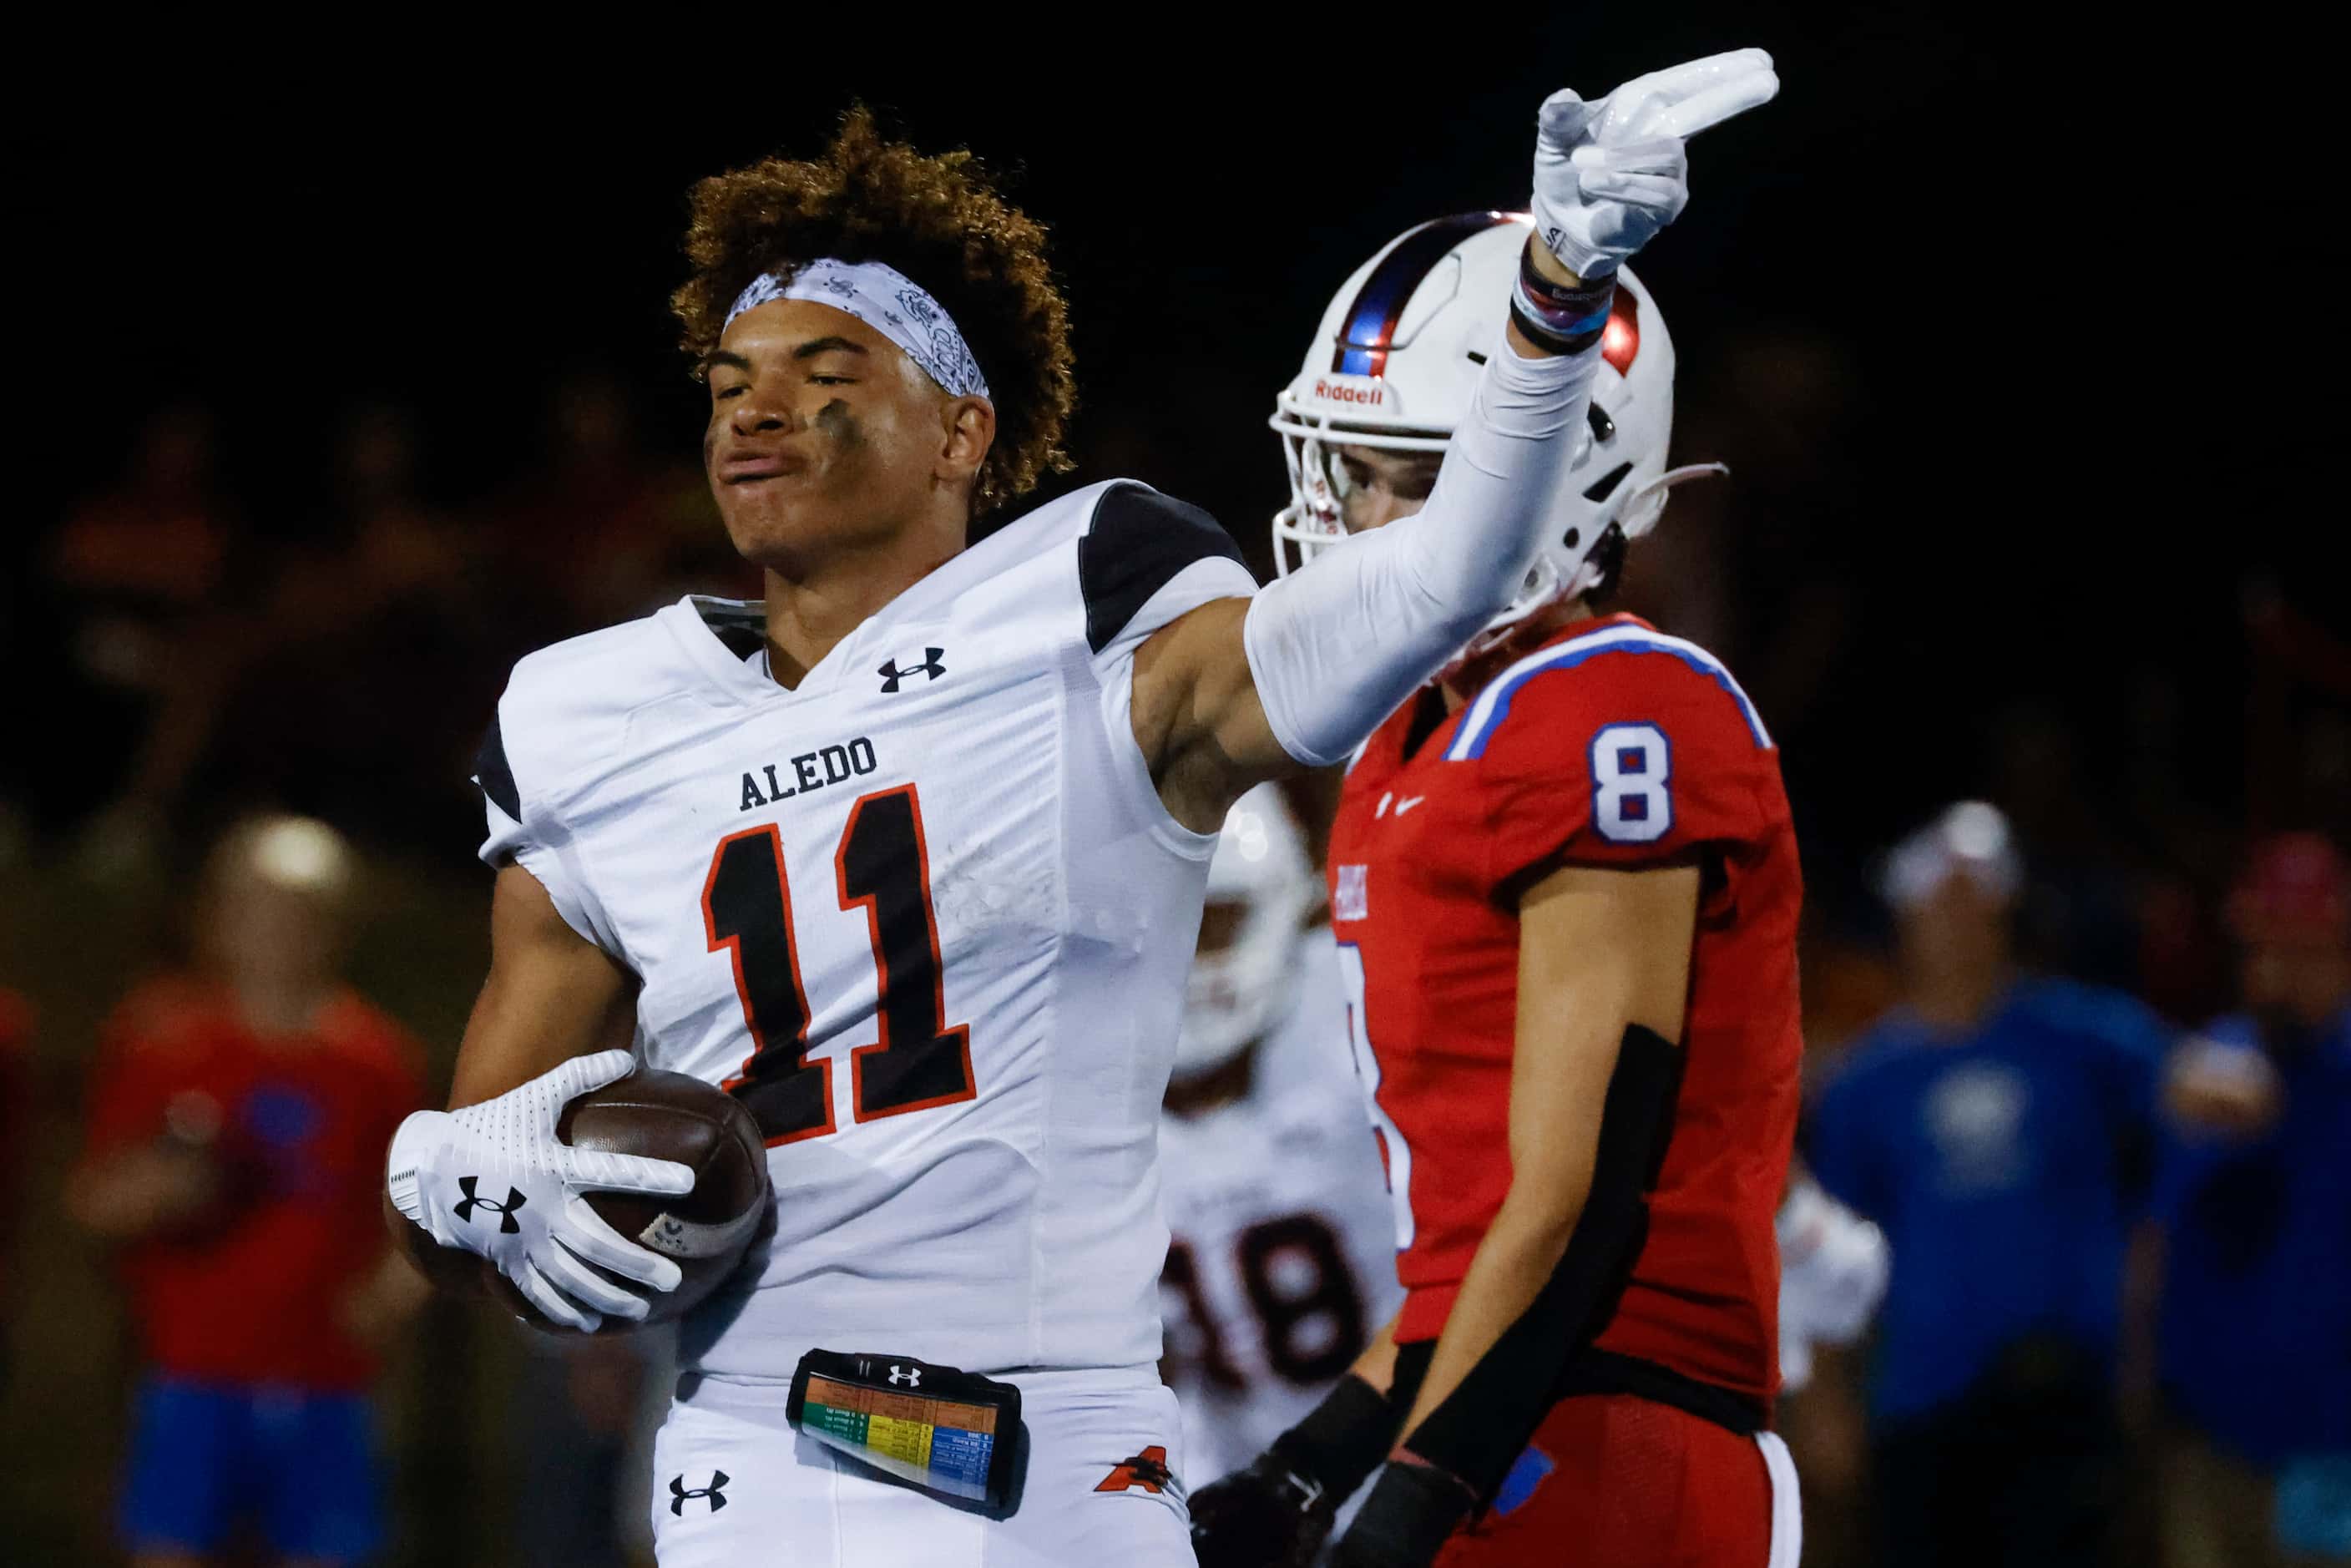 Aledo High’s Jalen Pope (11) celebrates after completing a pass during a season-opening...